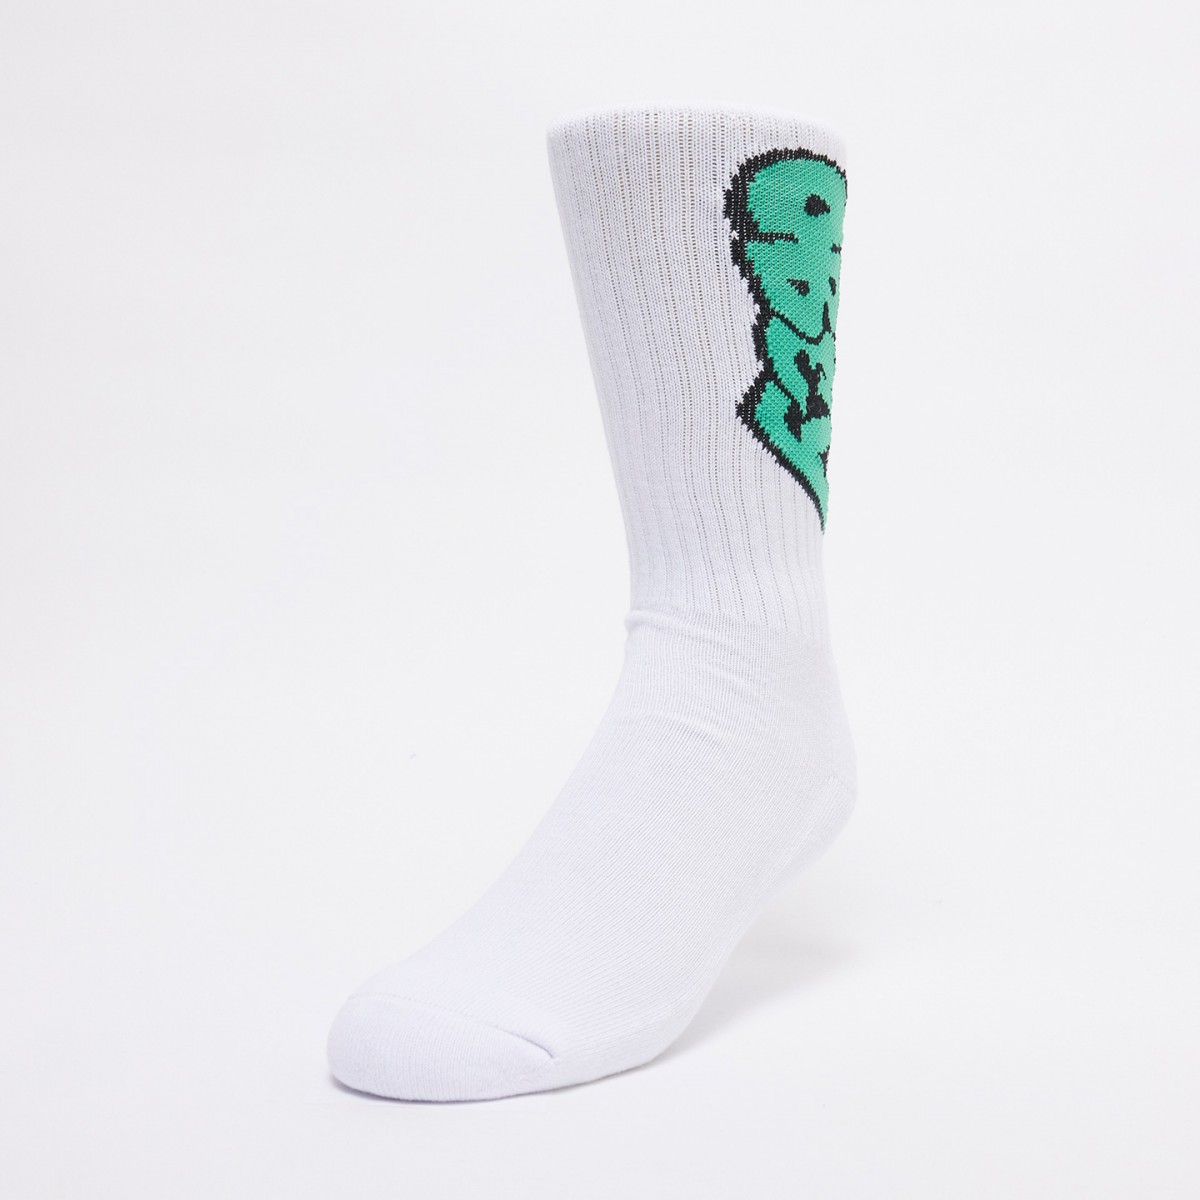 OBEY - Chaussettes blanches